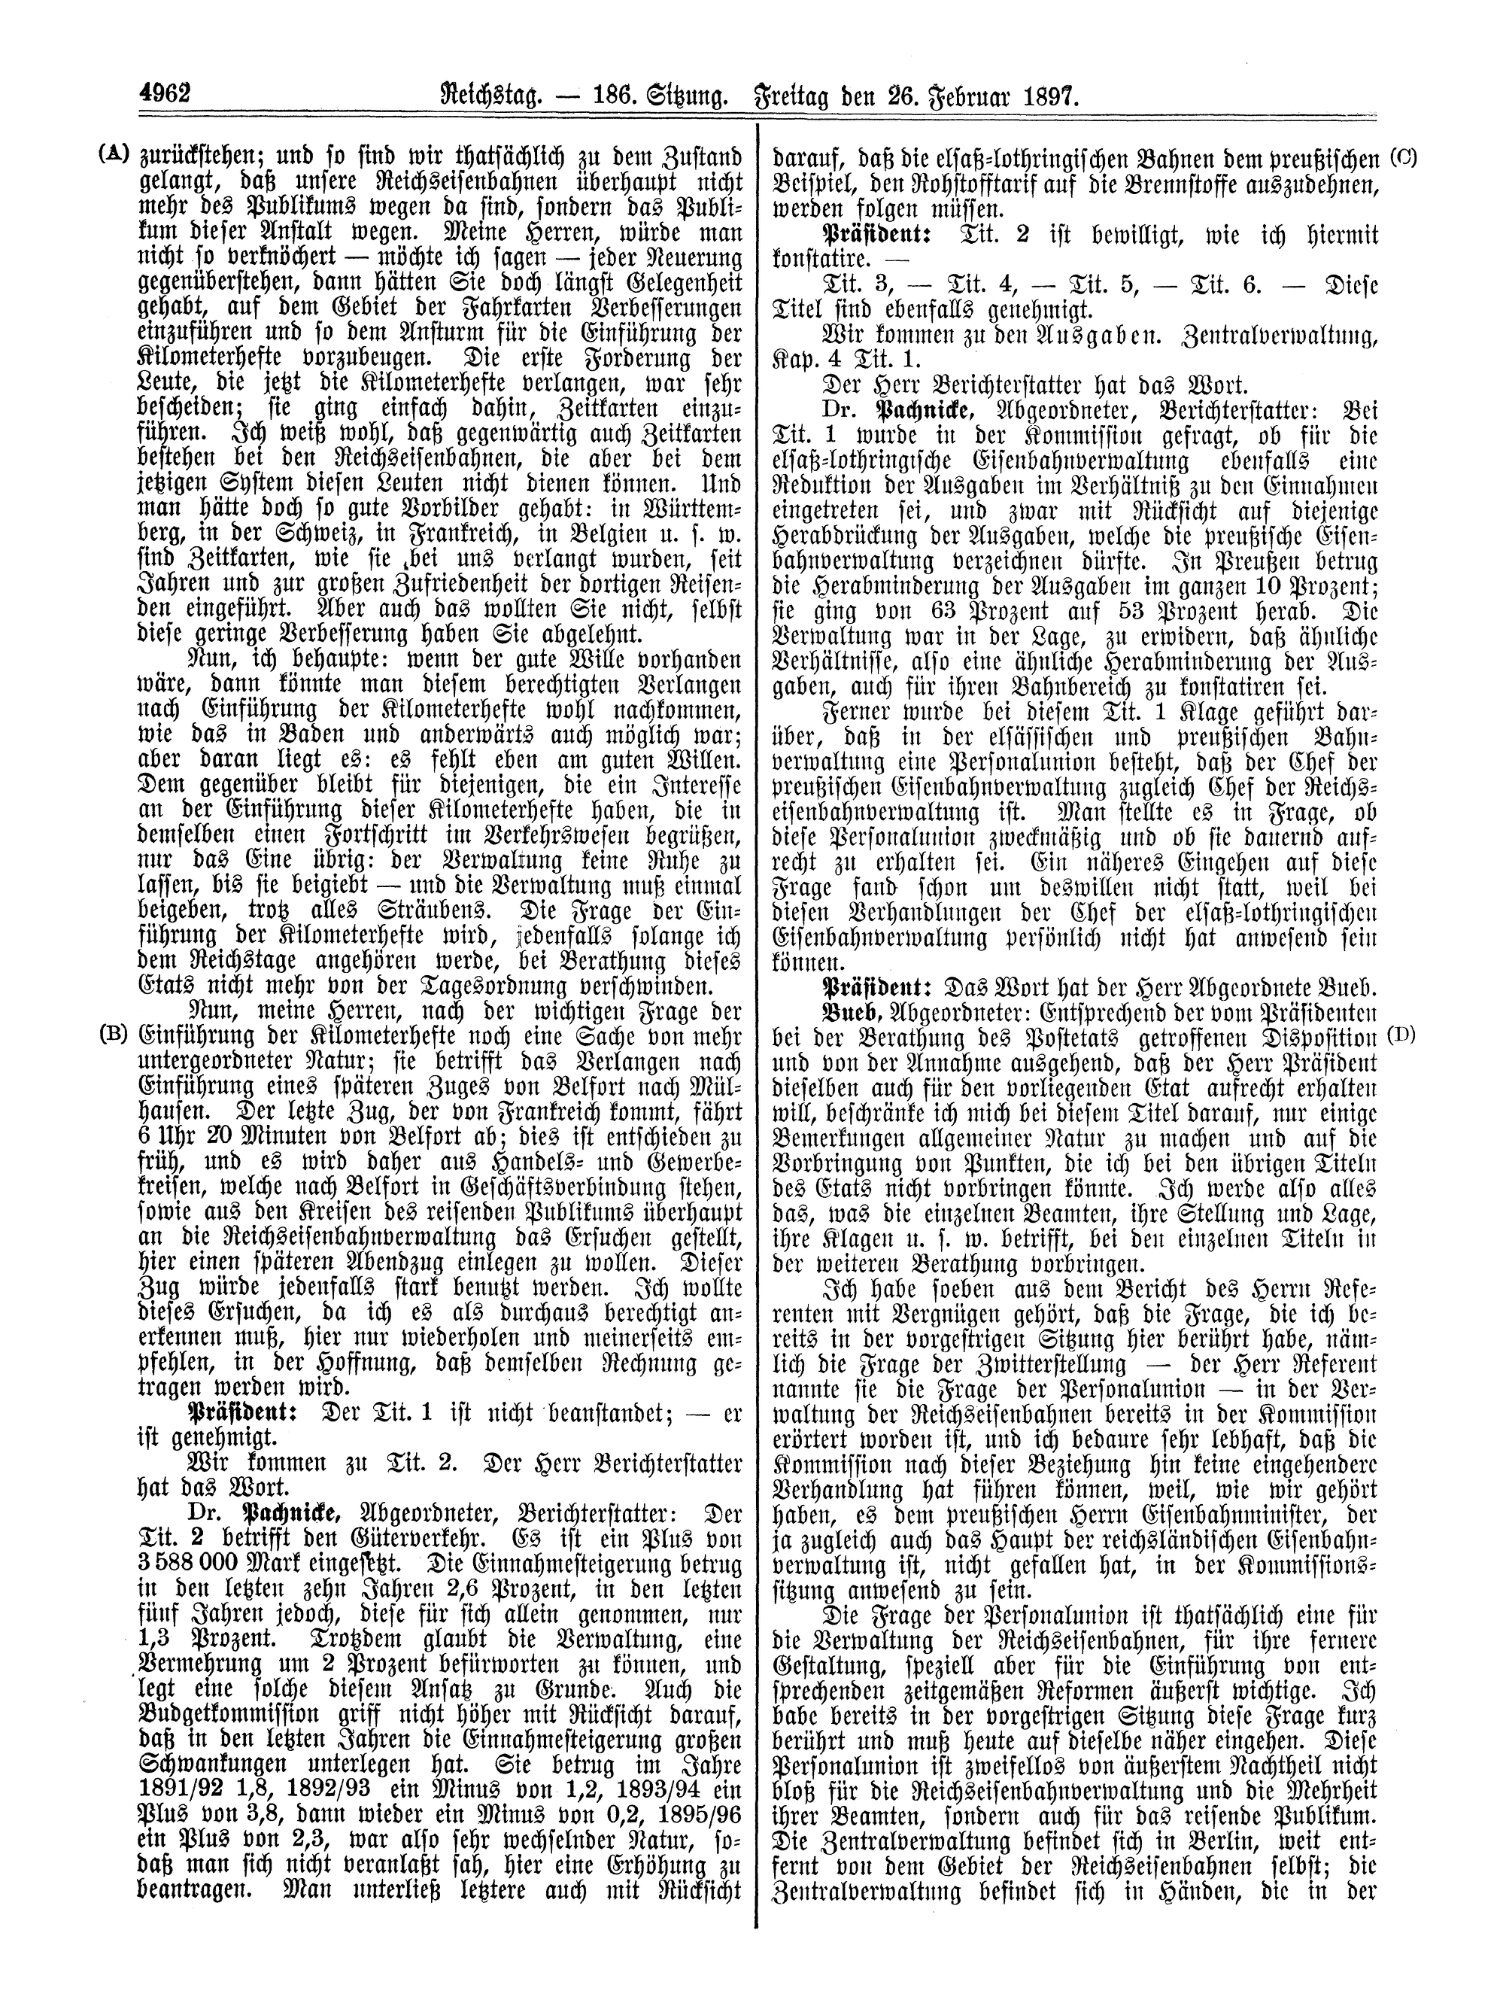 Scan of page 4962